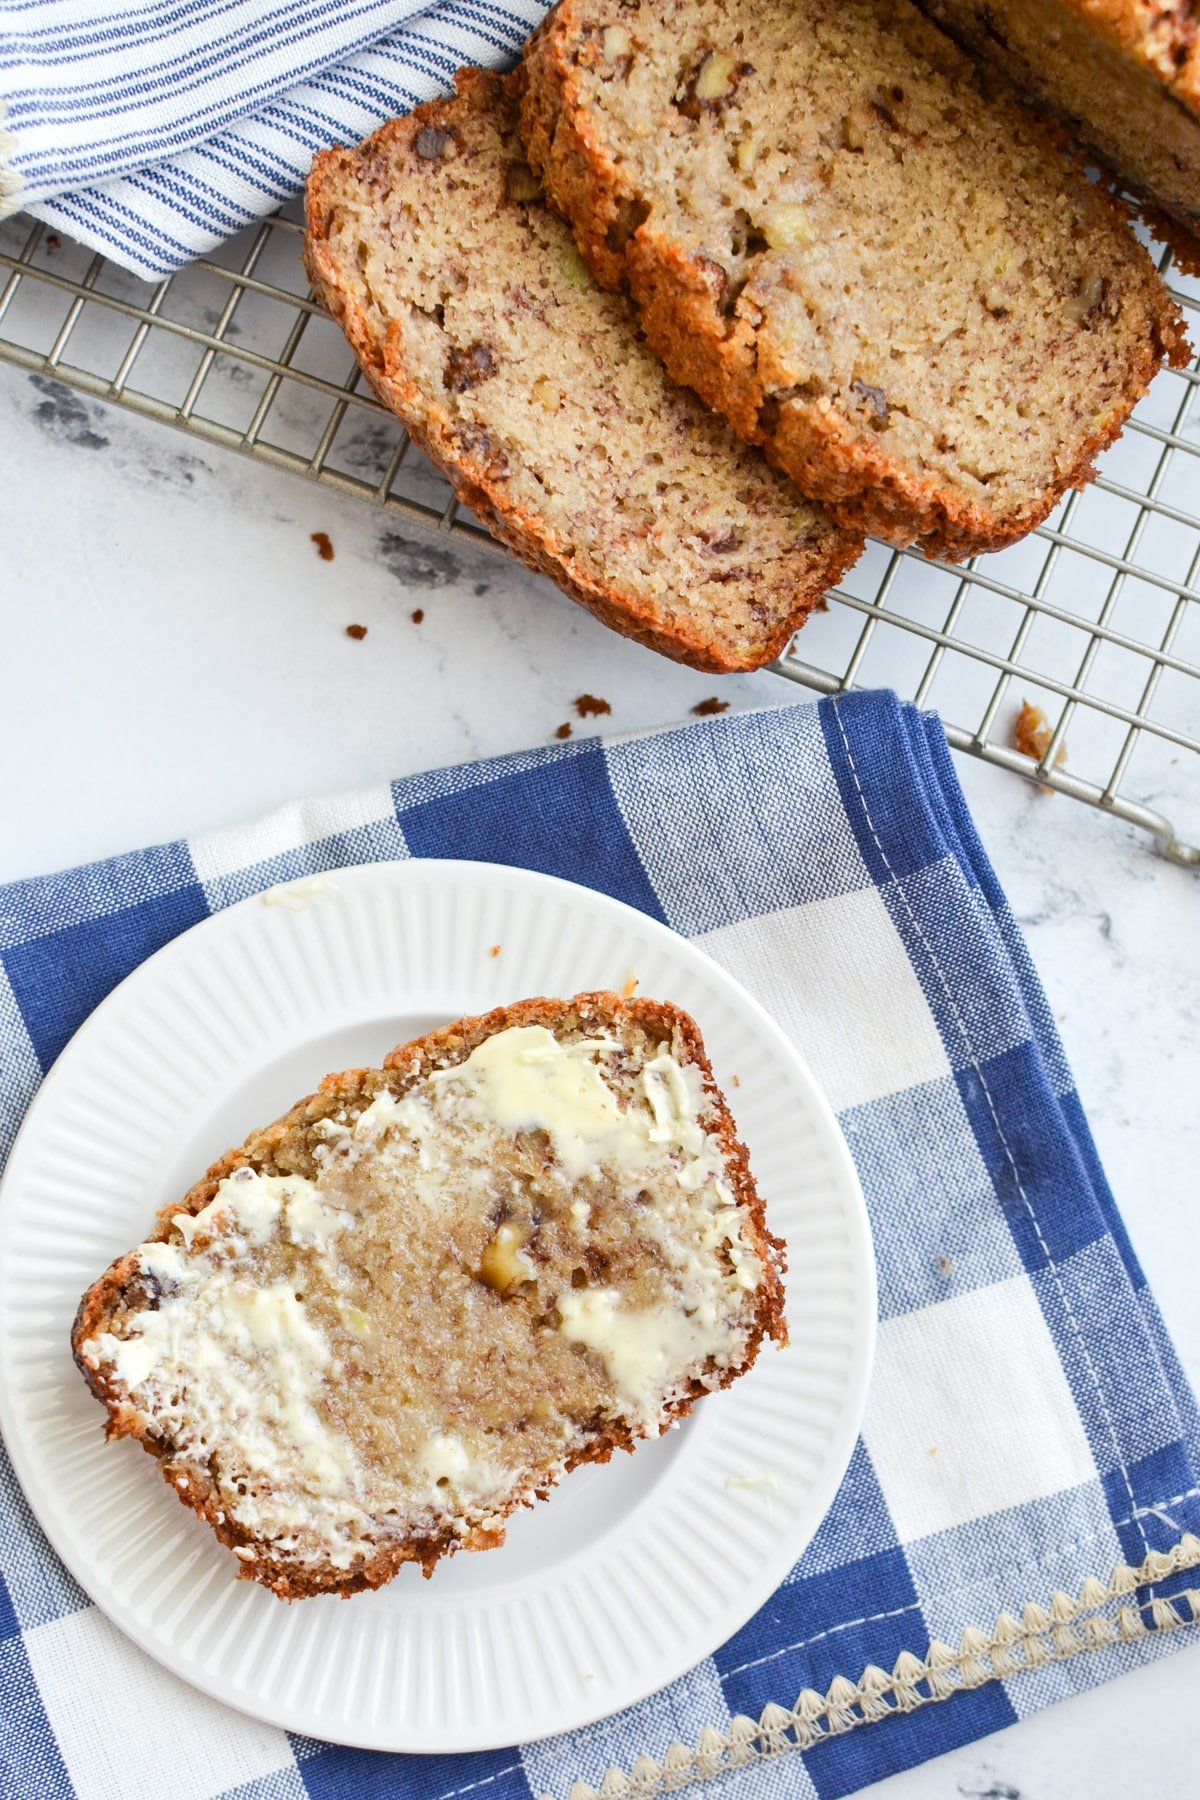 A slice of banana bread spread with butter.